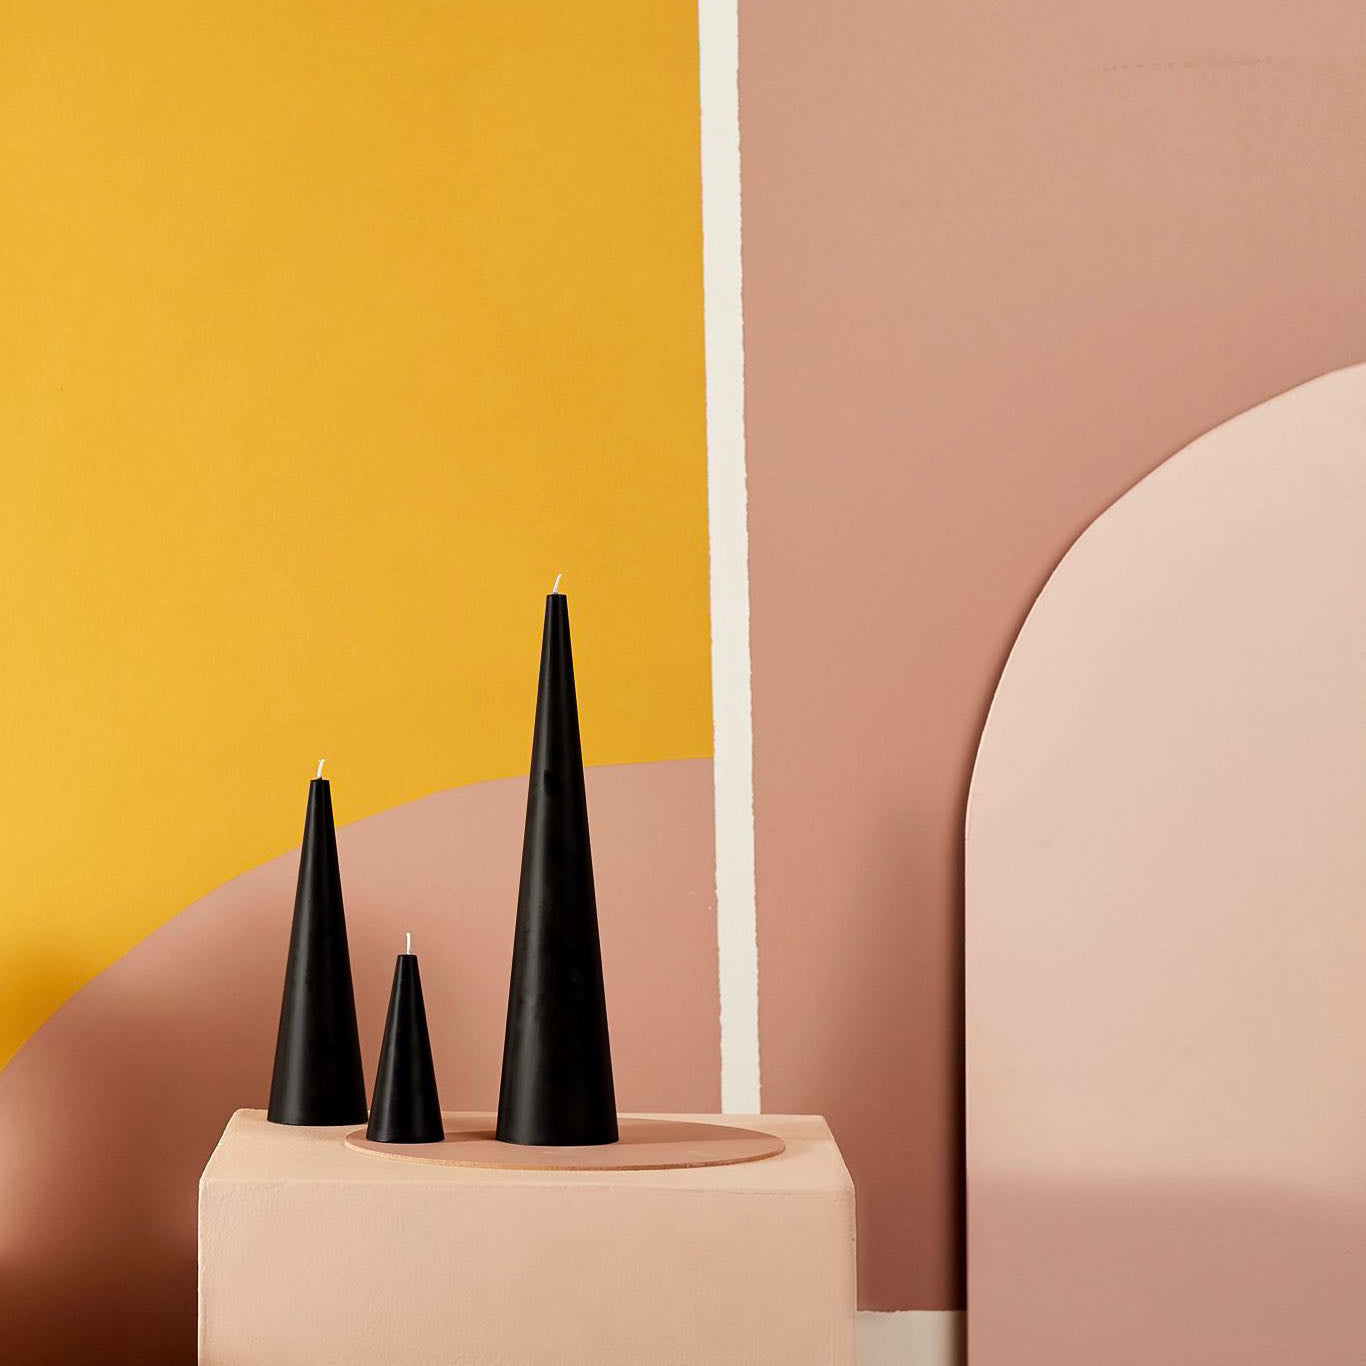 Black cone candles